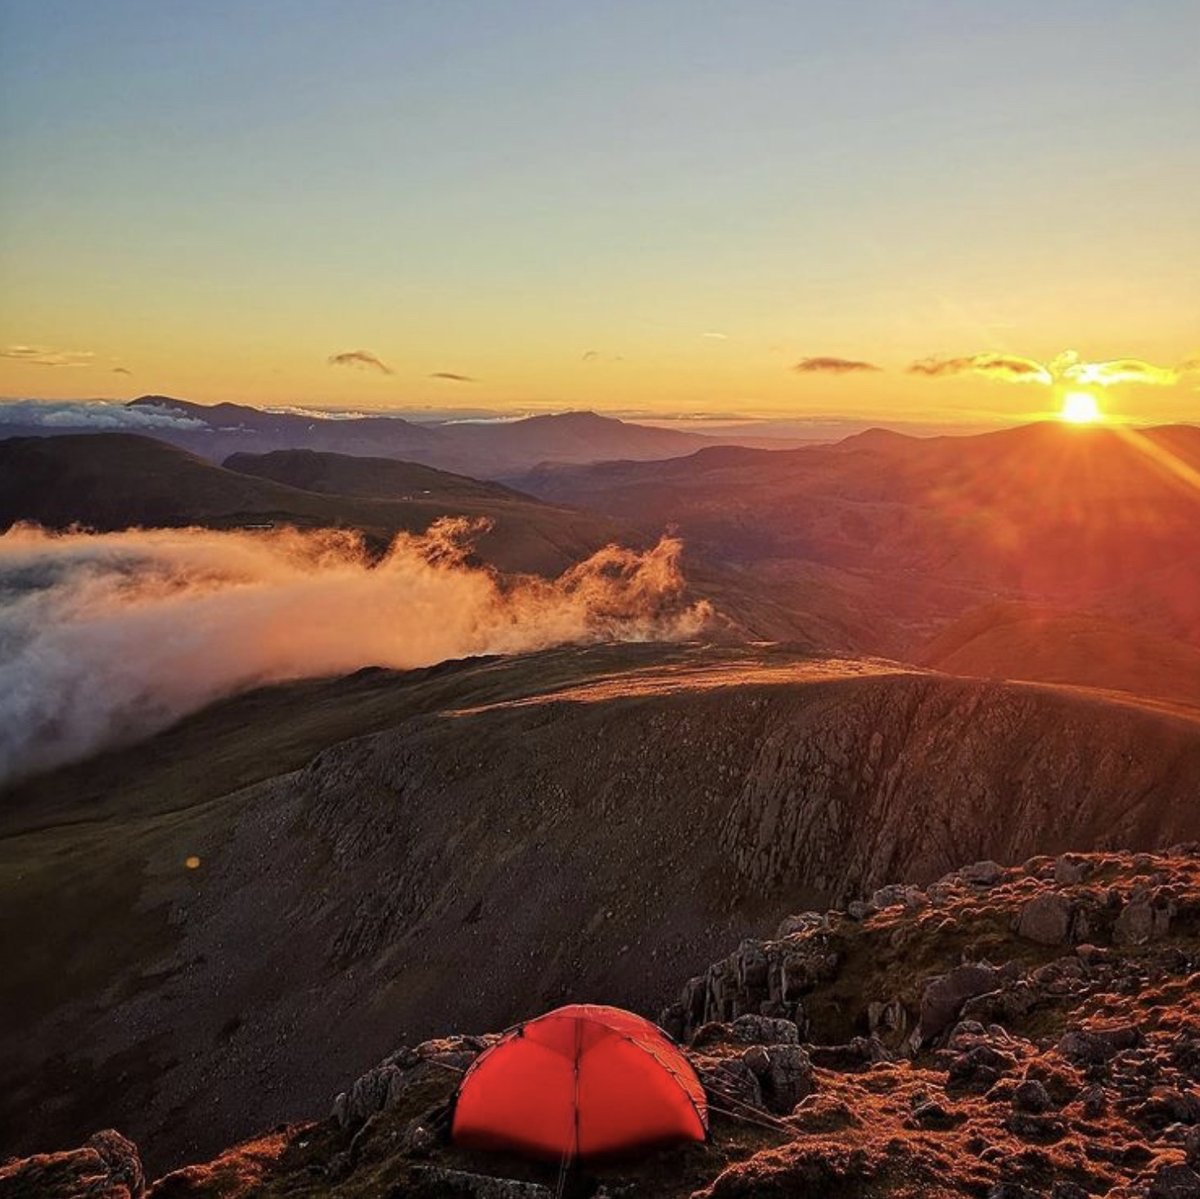 Welcome to the Easter Weekend!

The magic of the outdoors! Who would want to camp here?
Shot from IG/wildcamperzzz #sunrise #wildcamping #exploremore #camping #adventurecamping